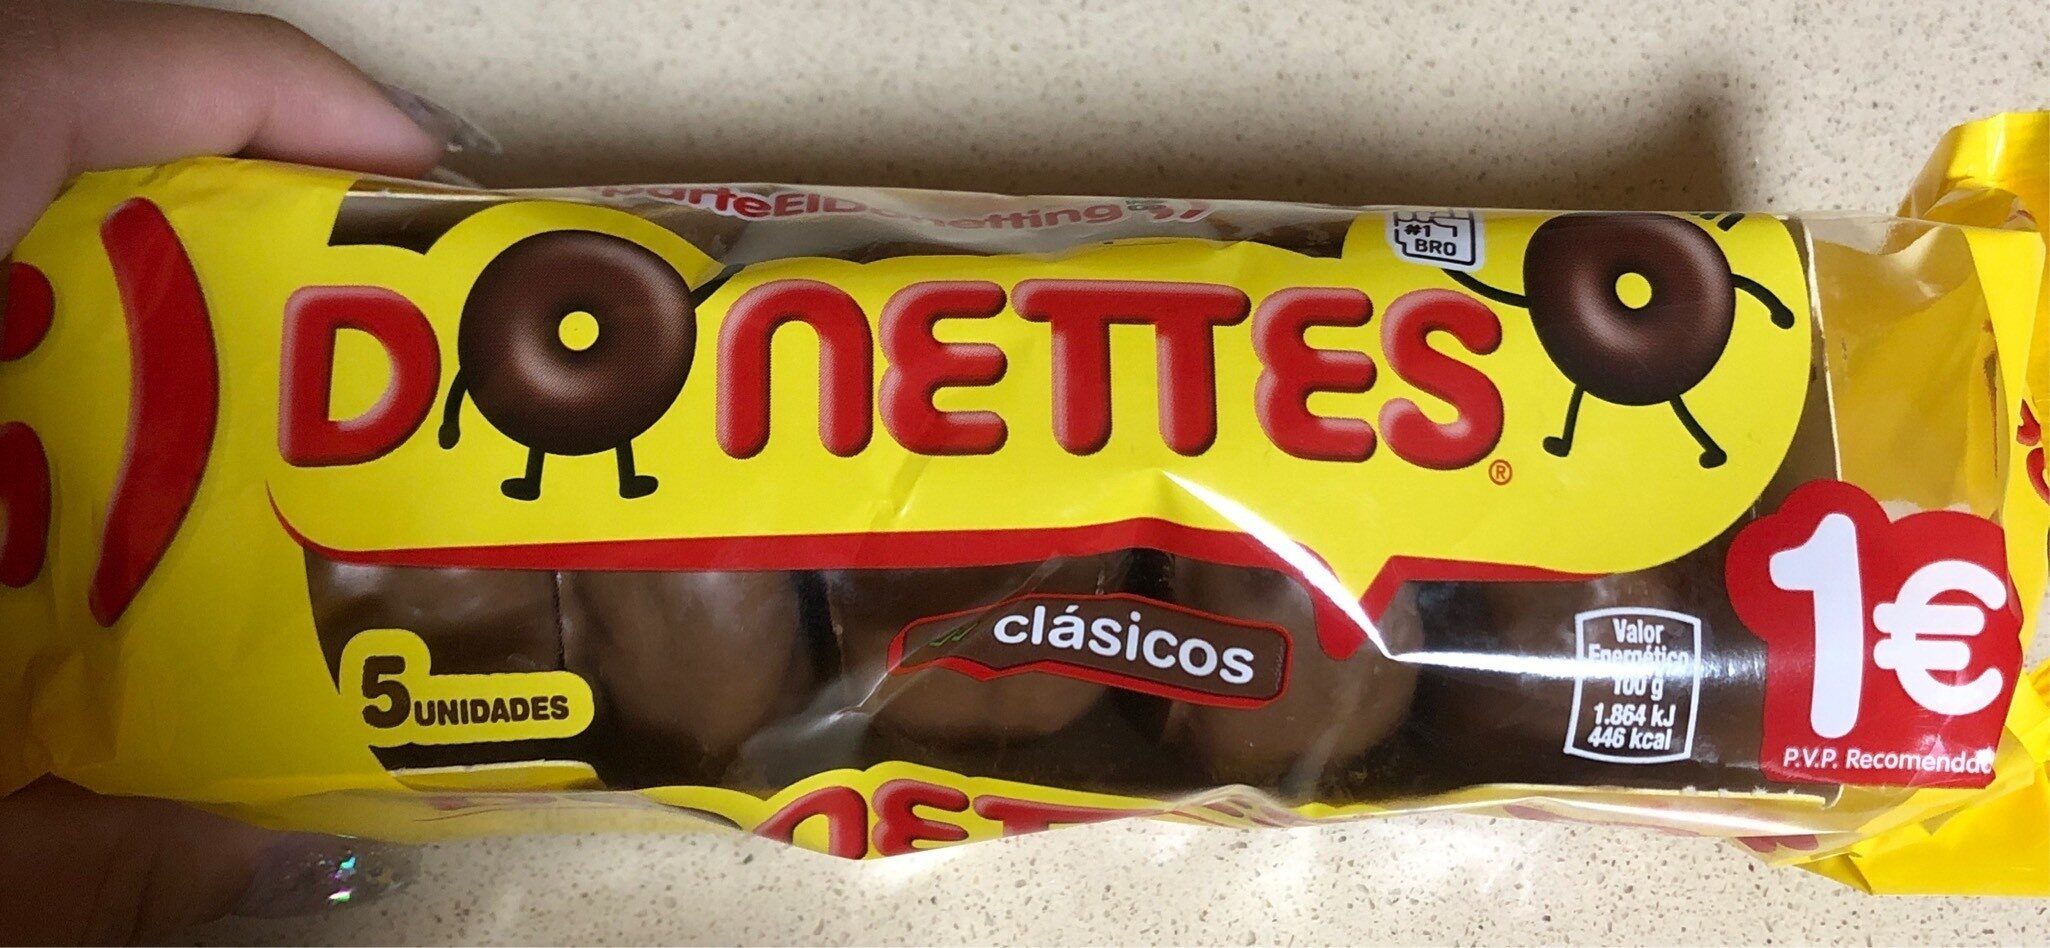 Donettes - Producto